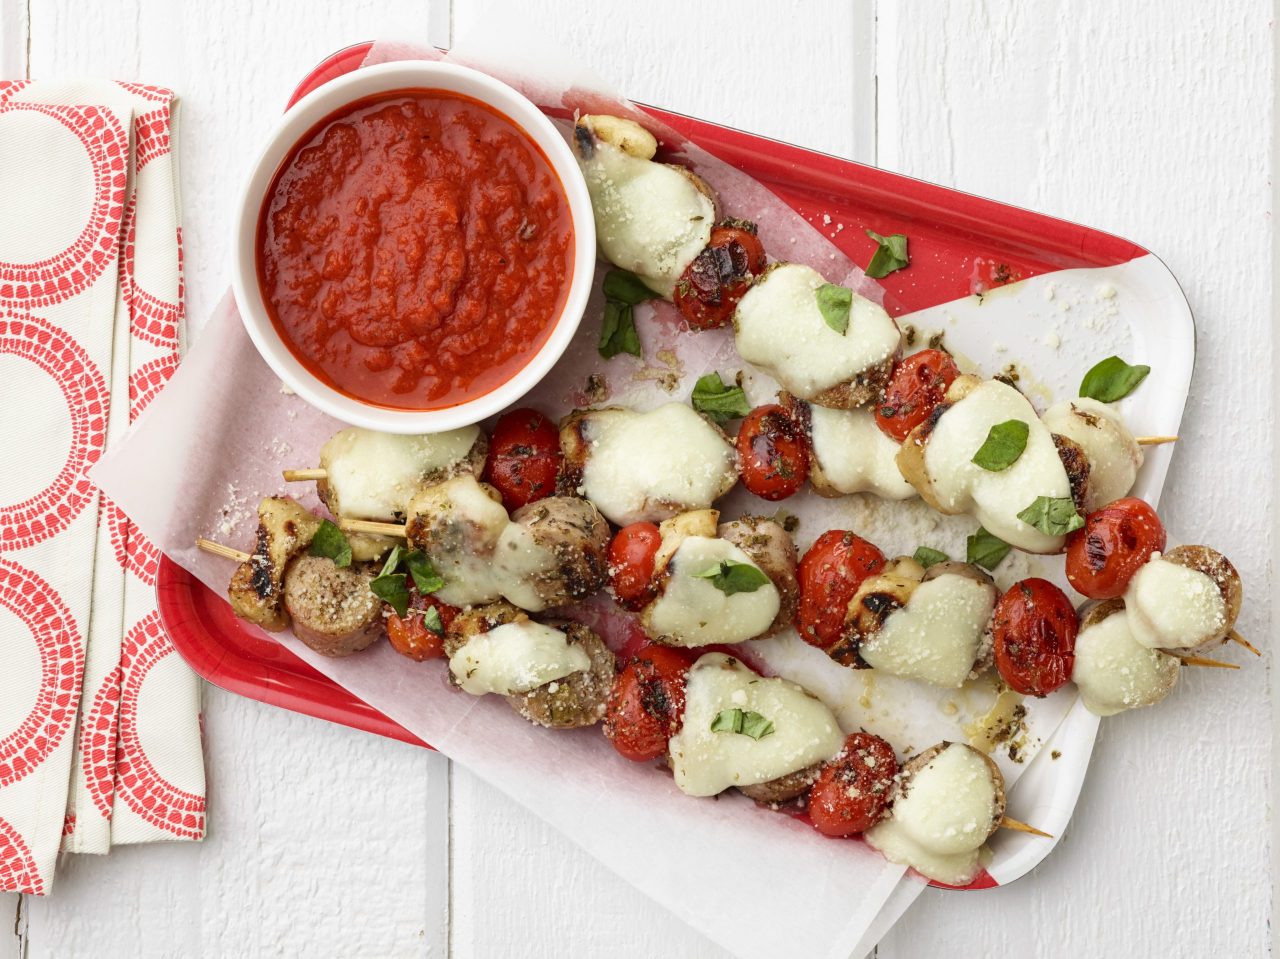 Kids Can Make: Pizza Skewers by Food Network Kitchen